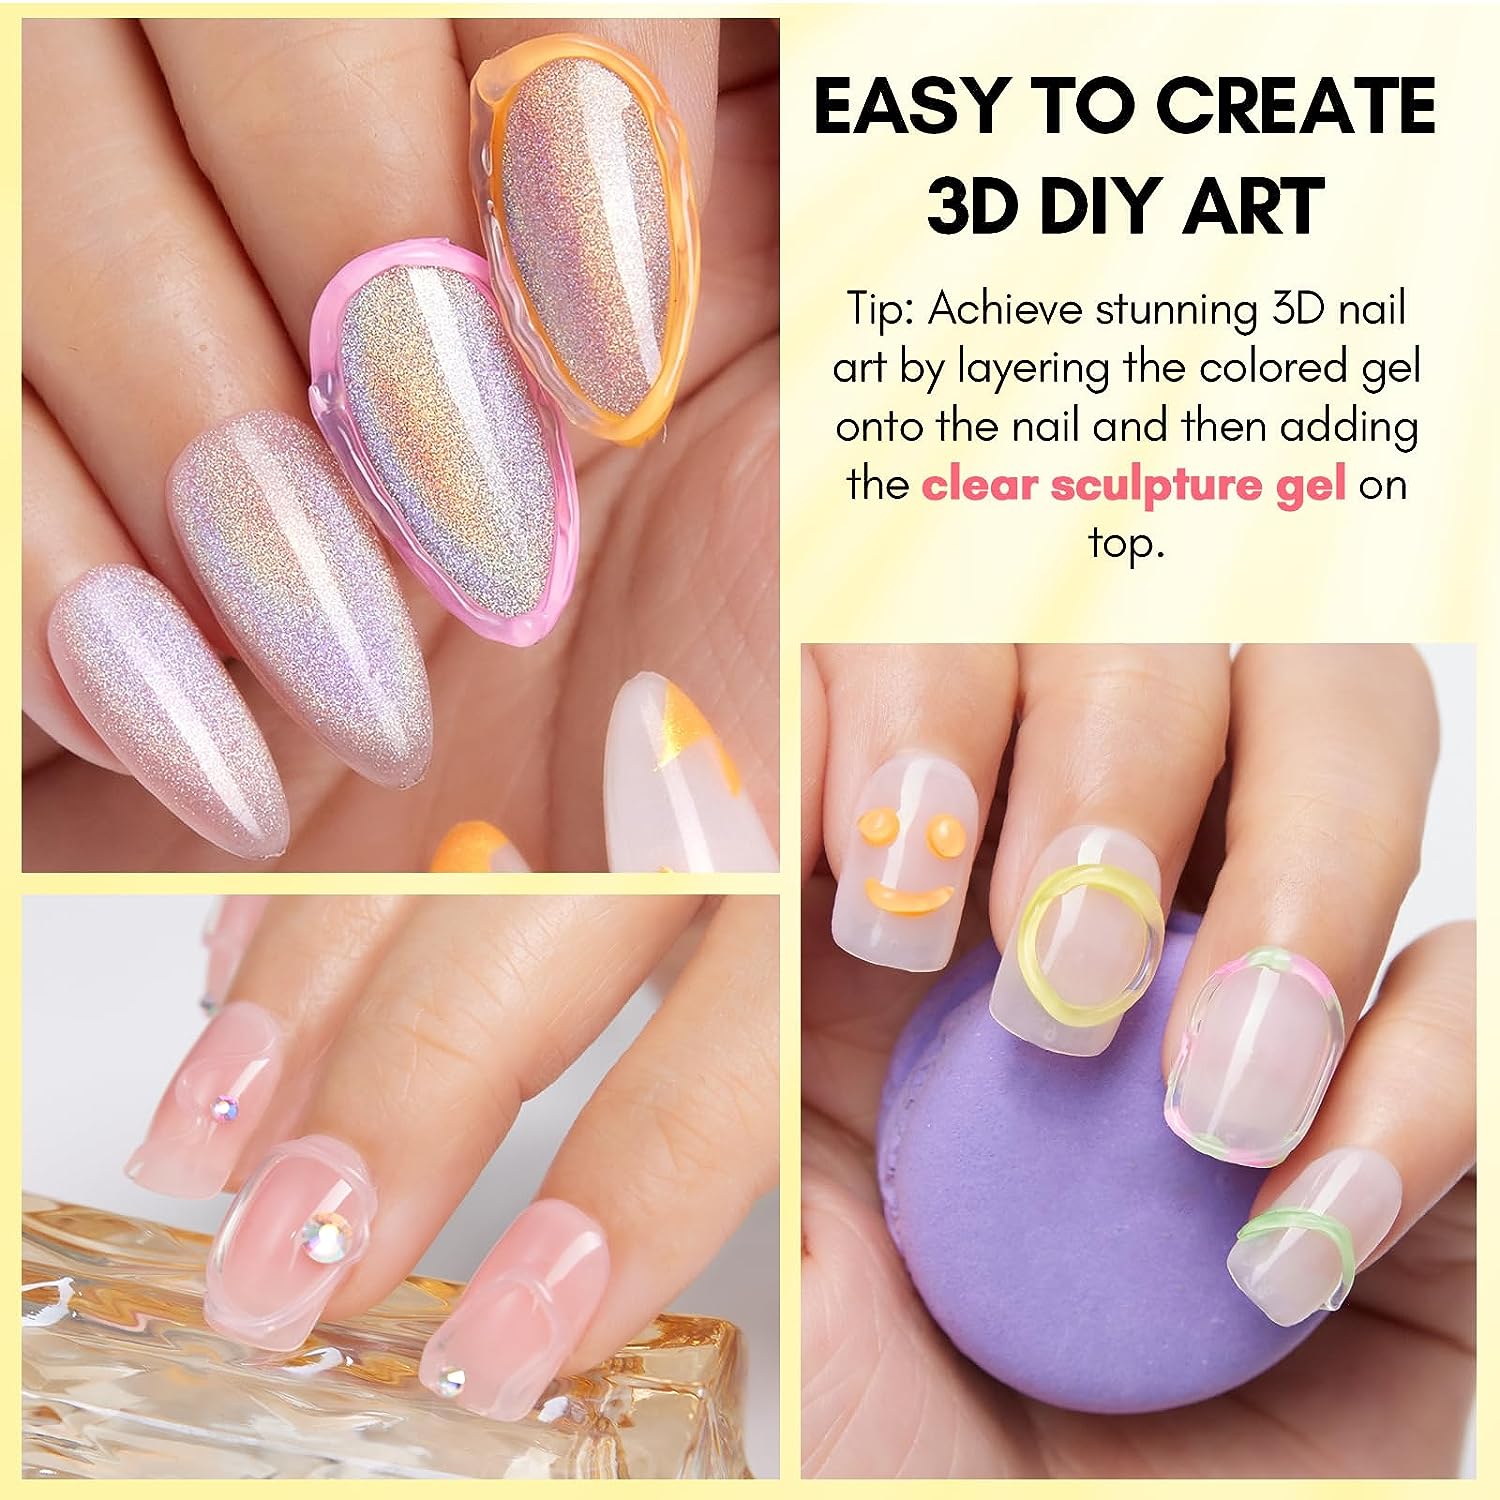 17 3D Nail Ideas for Your Most Artistic Manicure Yet